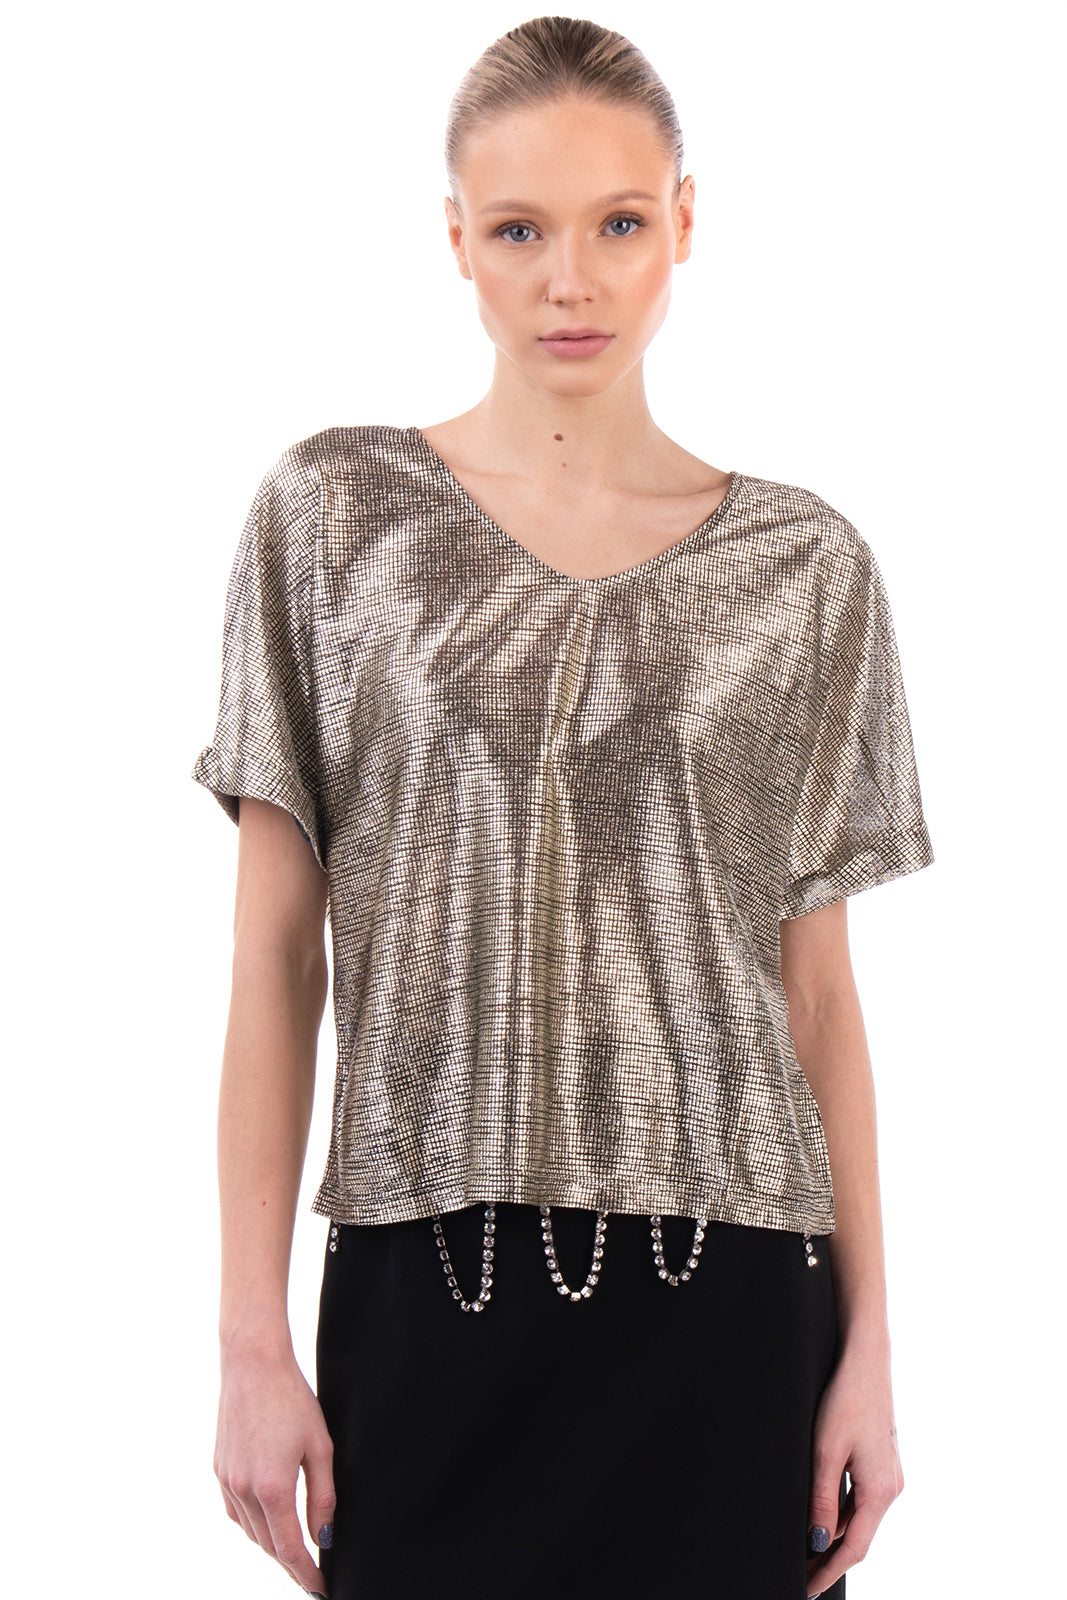 JOLIE By EDWARD SPIERS Top Blouse Size S Metallic Effect Geometric Made in Italy gallery main photo